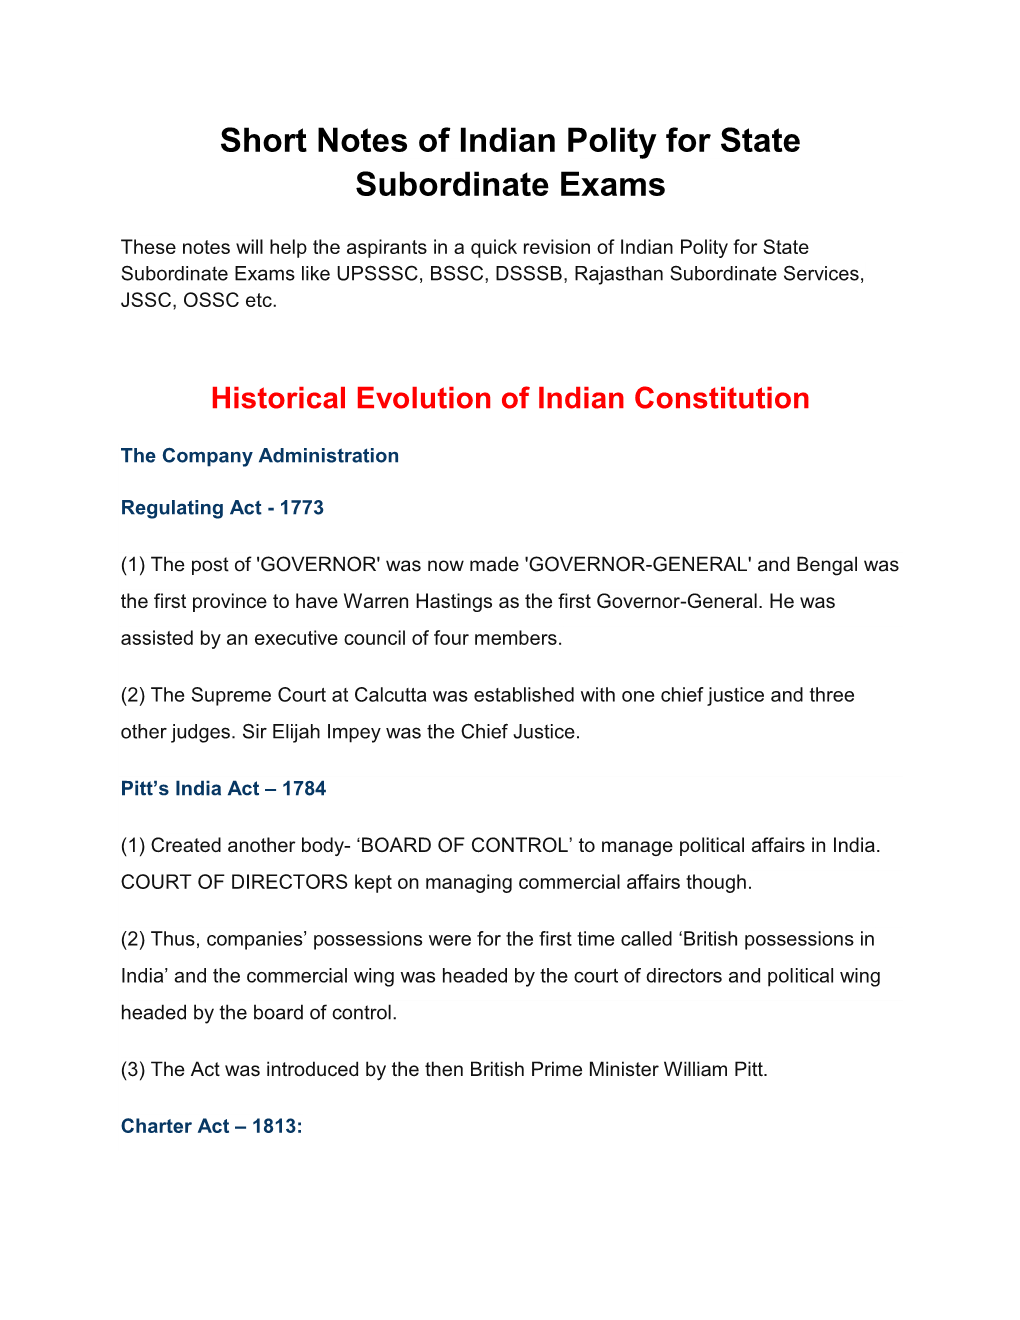 Short Notes of Indian Polity for State Subordinate Exams